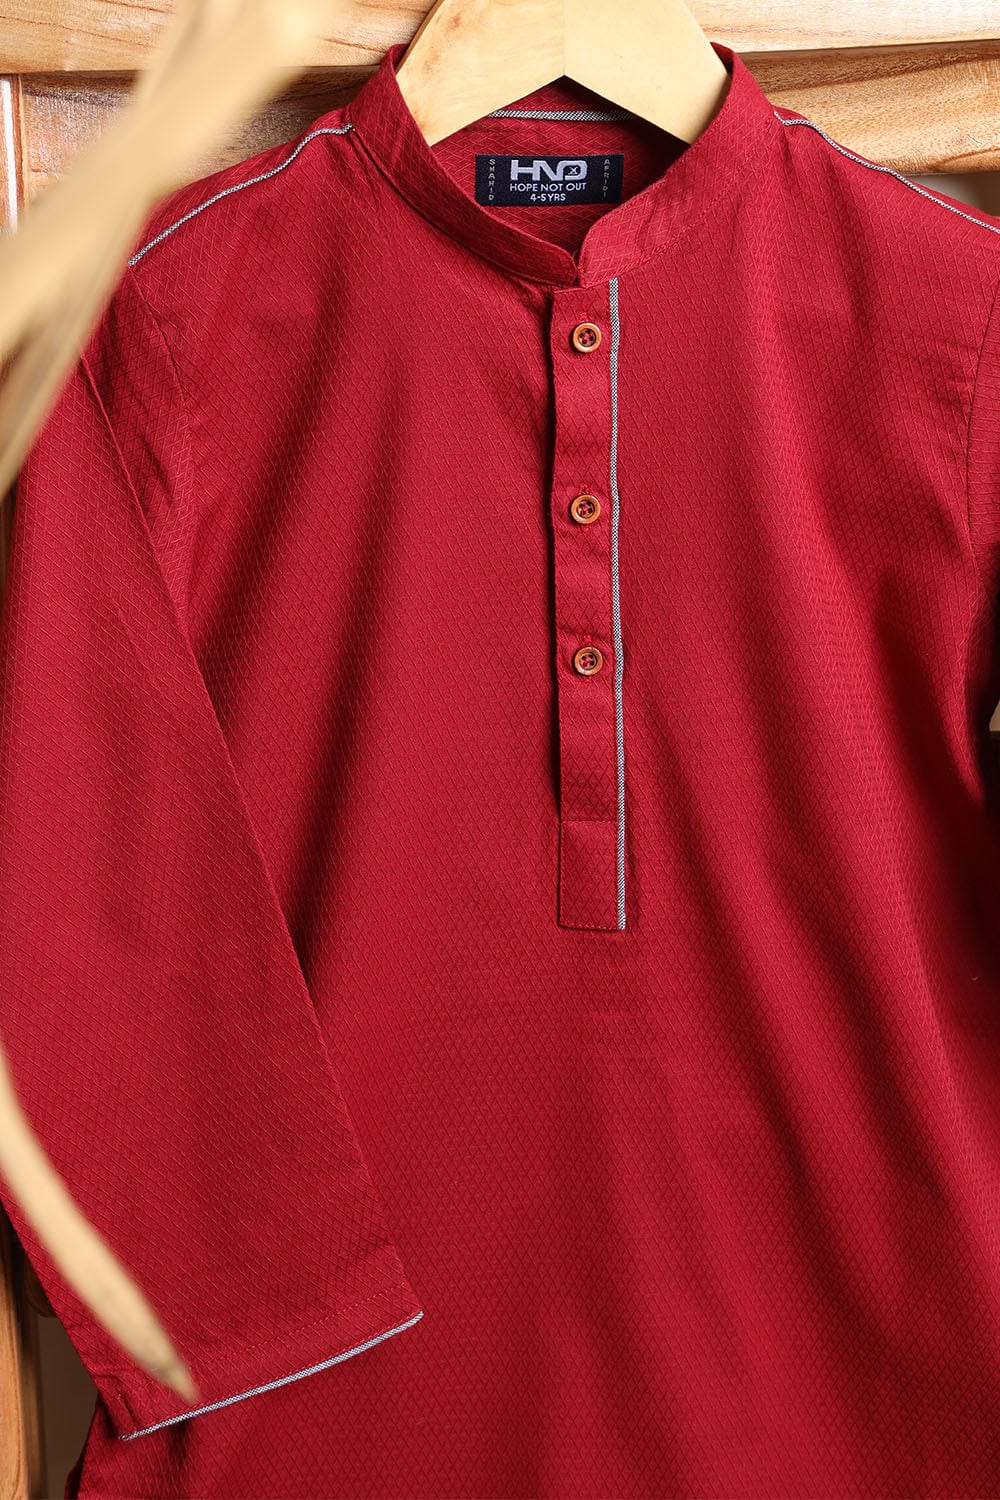 Hope Not Out by Shahid Afridi Eastern Boys Kurta Boys Maroon Kurta With Contrast Paping